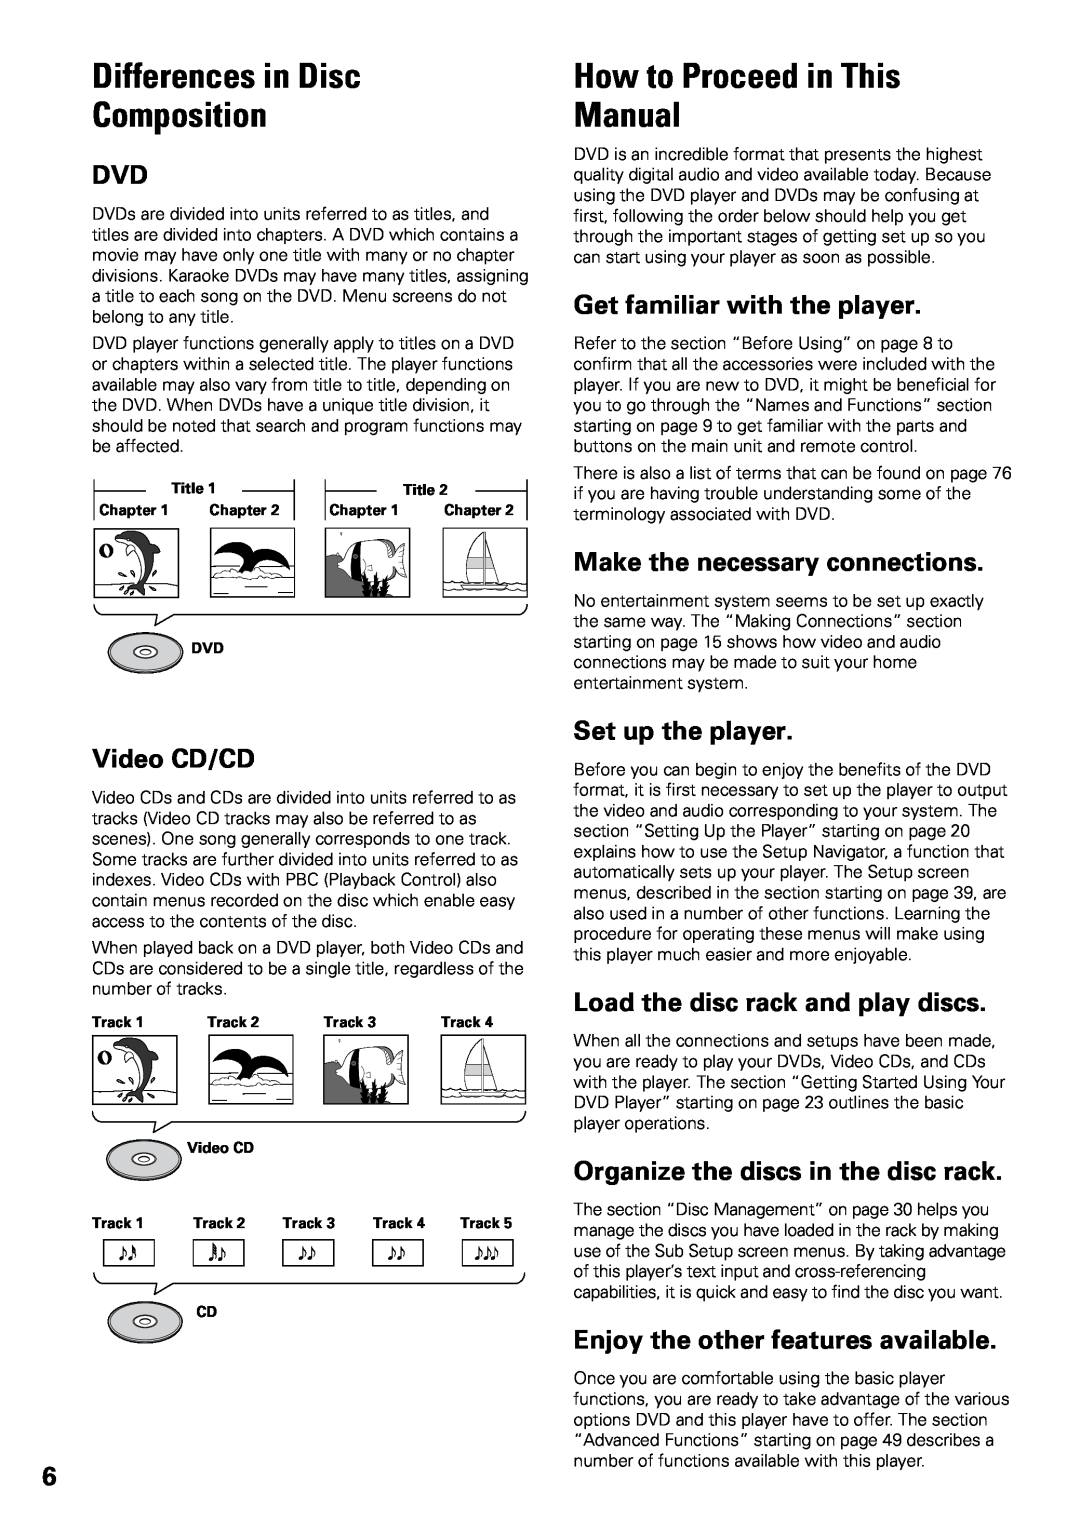 Pioneer DV-F07 Differences in Disc Composition, How to Proceed in This Manual, Get familiar with the player, Video CD/CD 